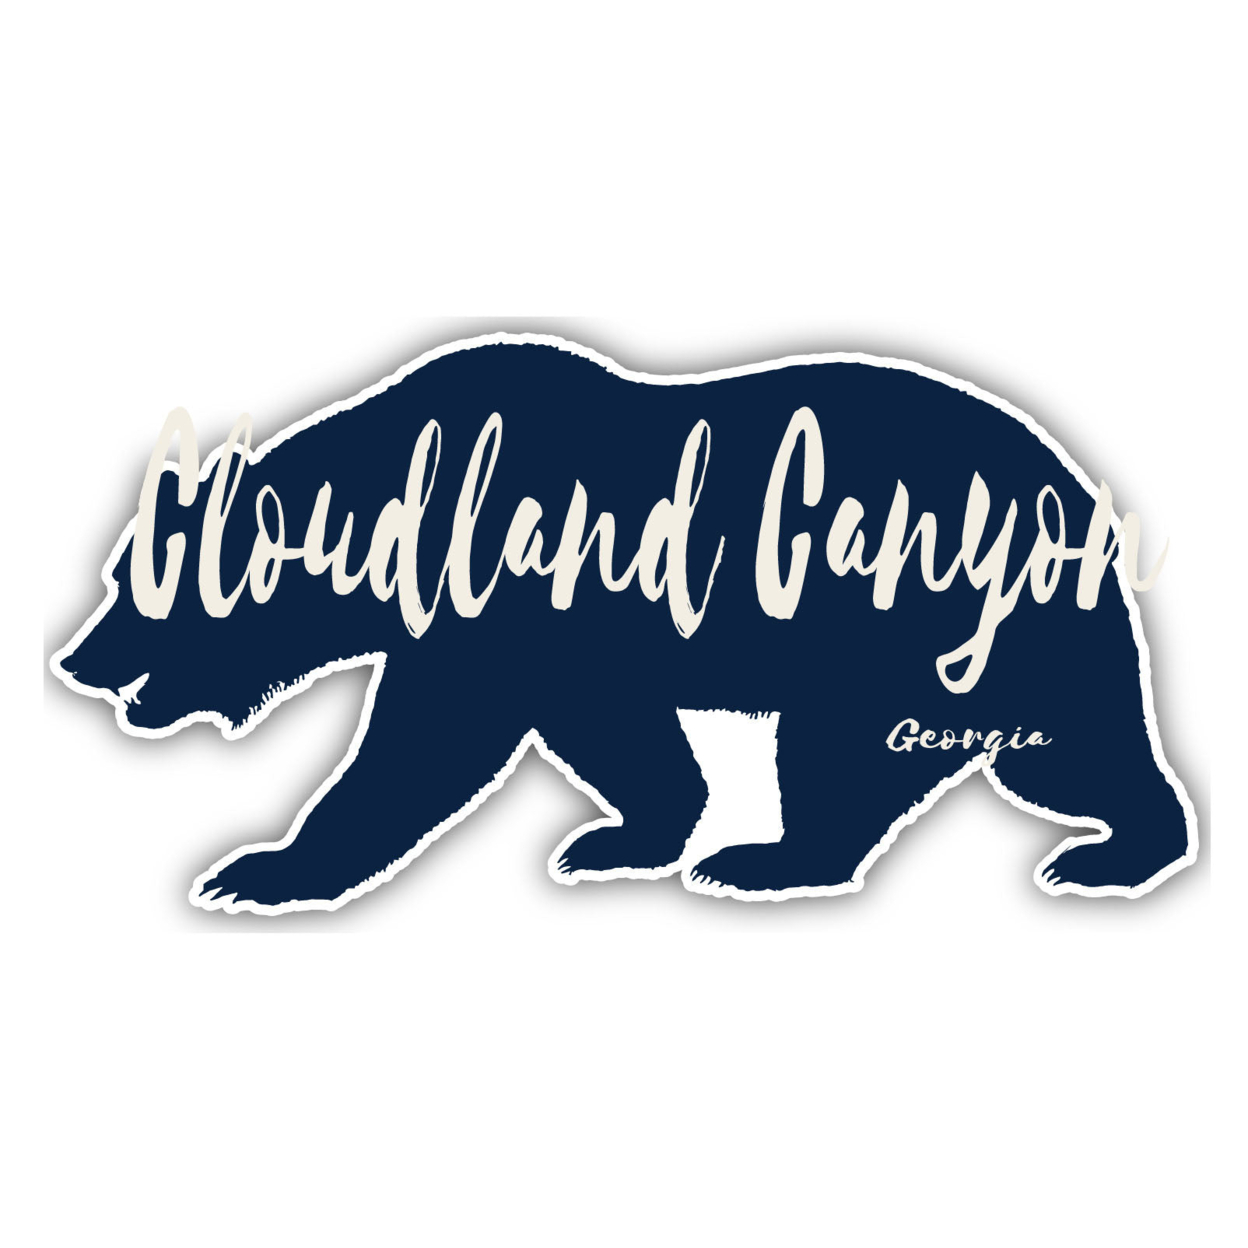 Cloudland Canyon Georgia Souvenir Decorative Stickers (Choose Theme And Size) - 4-Pack, 6-Inch, Tent